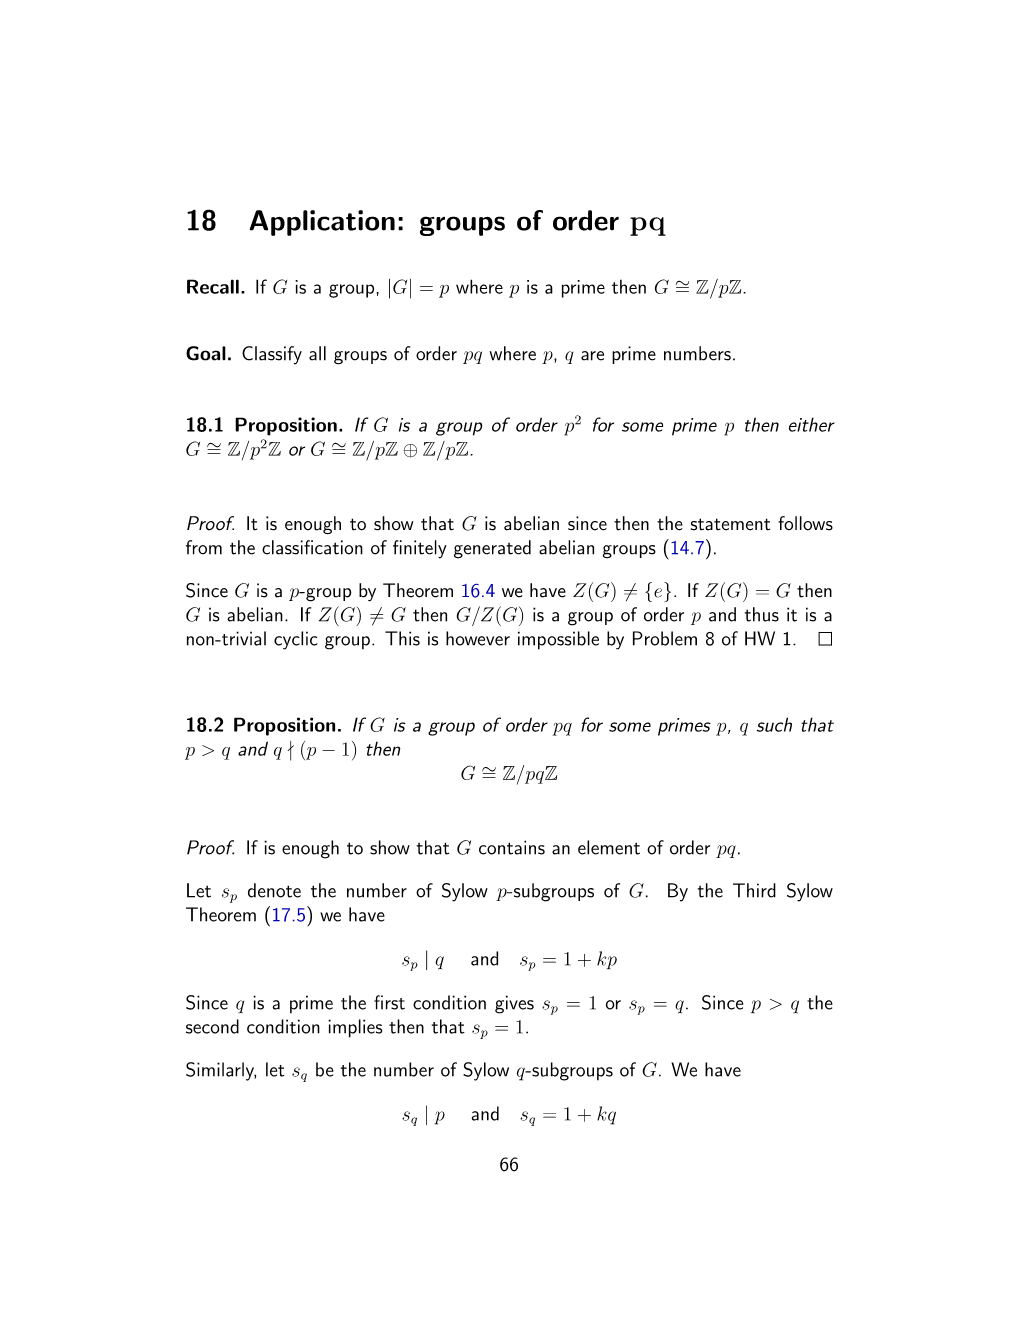 18 Application: Groups of Order Pq